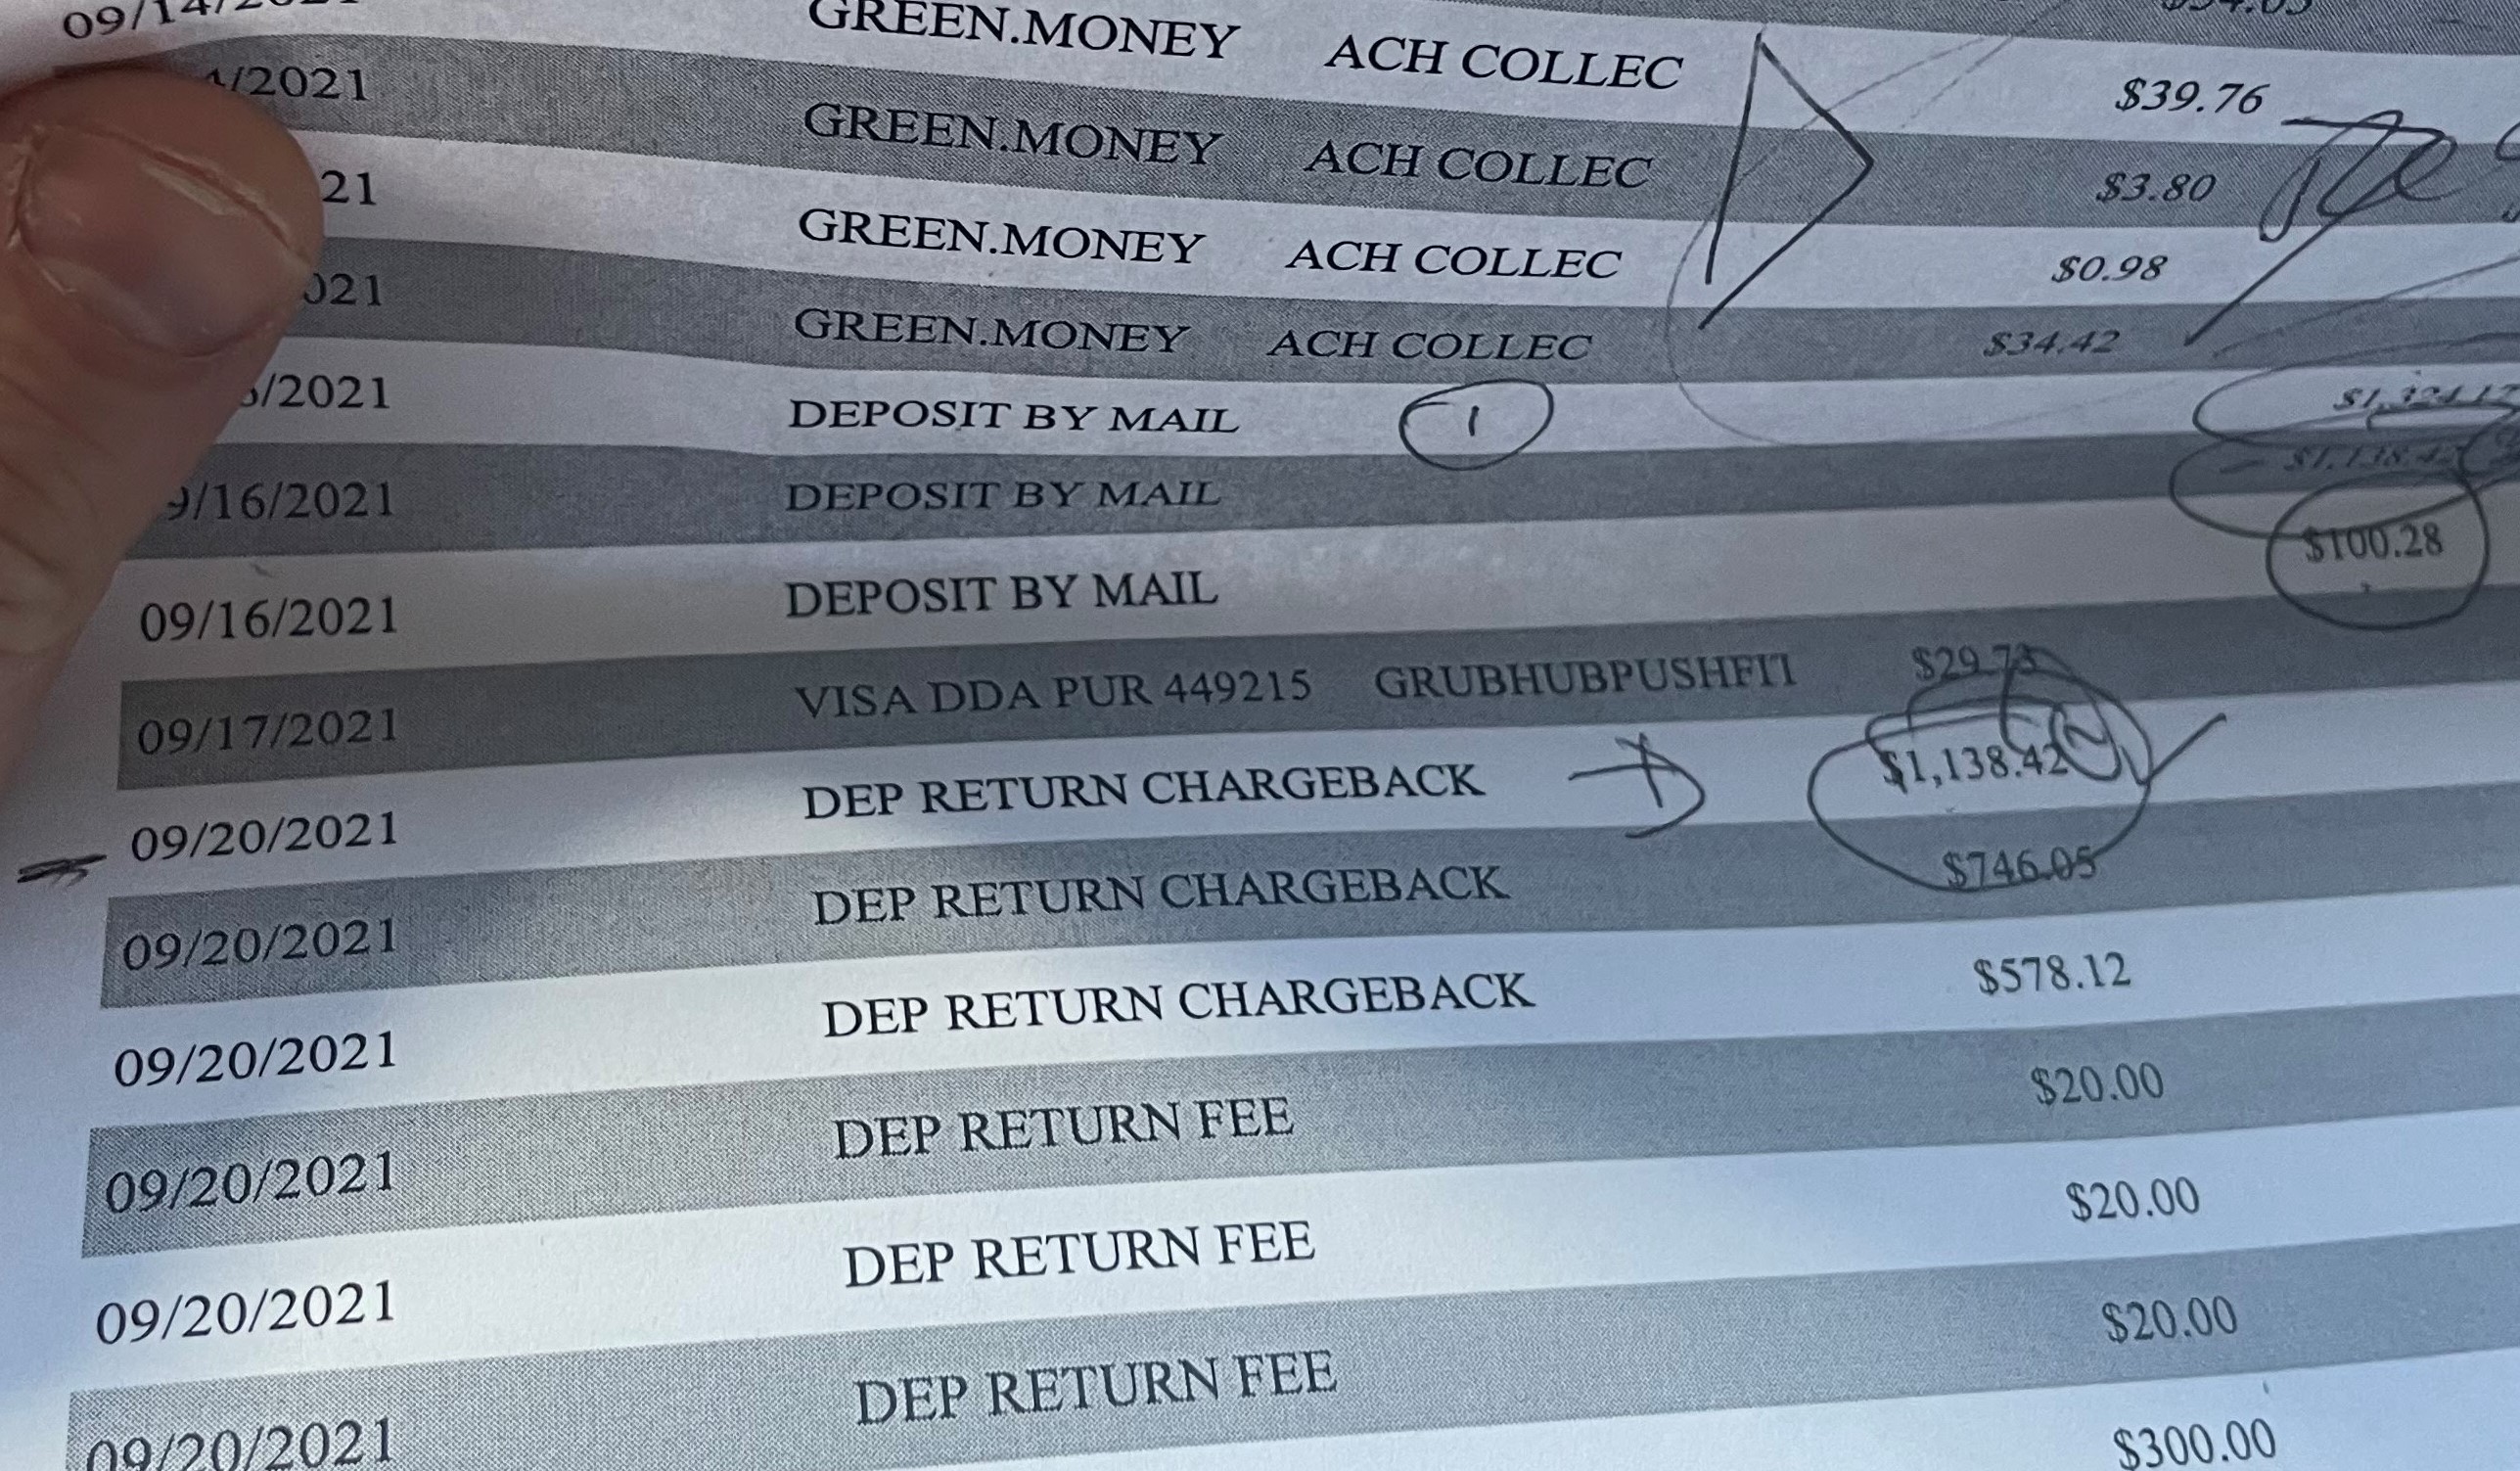 Proof that Check was Returned on top of Extra Fees